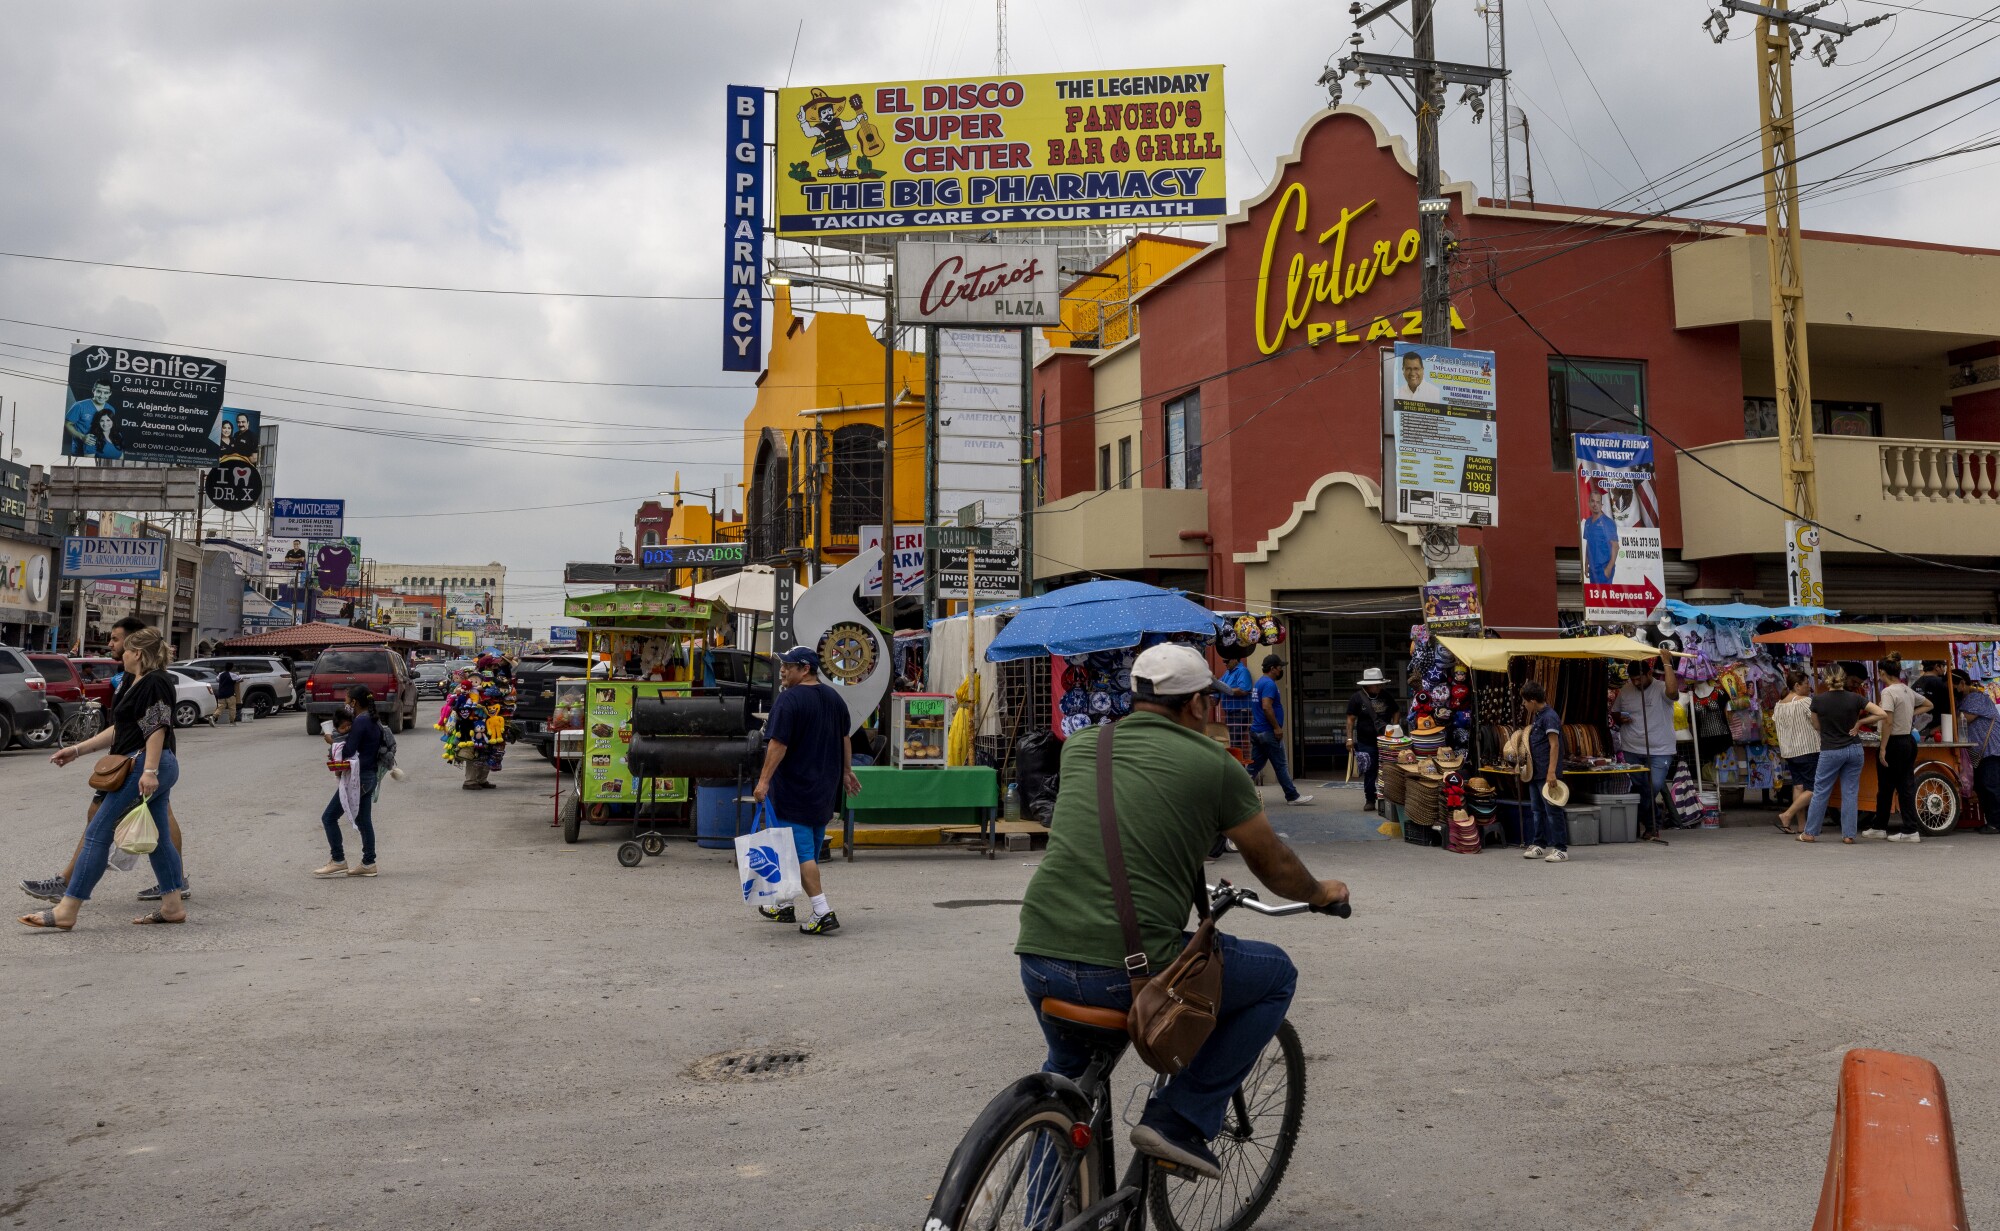 A busy street with crowds of people in Nuevo Progreso, Mexico.